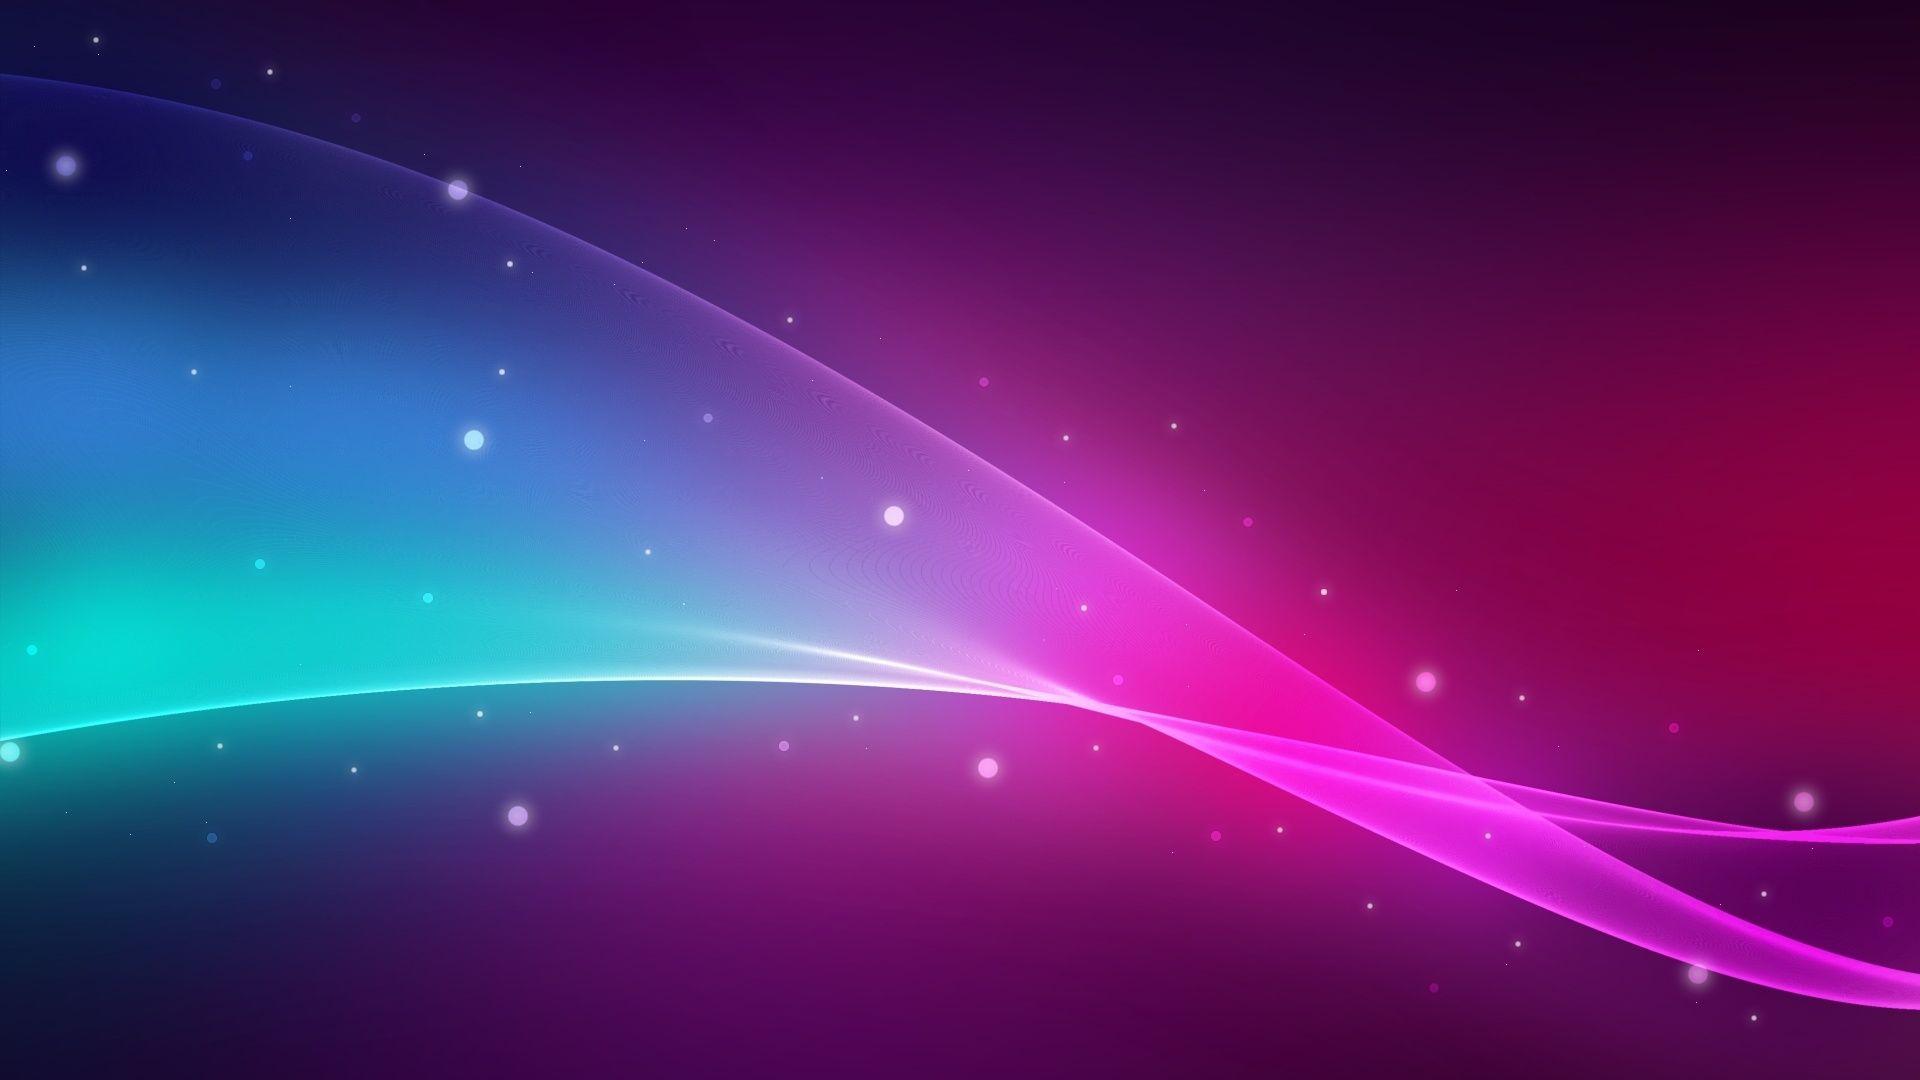 Blue And Pink Backgrounds - Wallpaper Cave